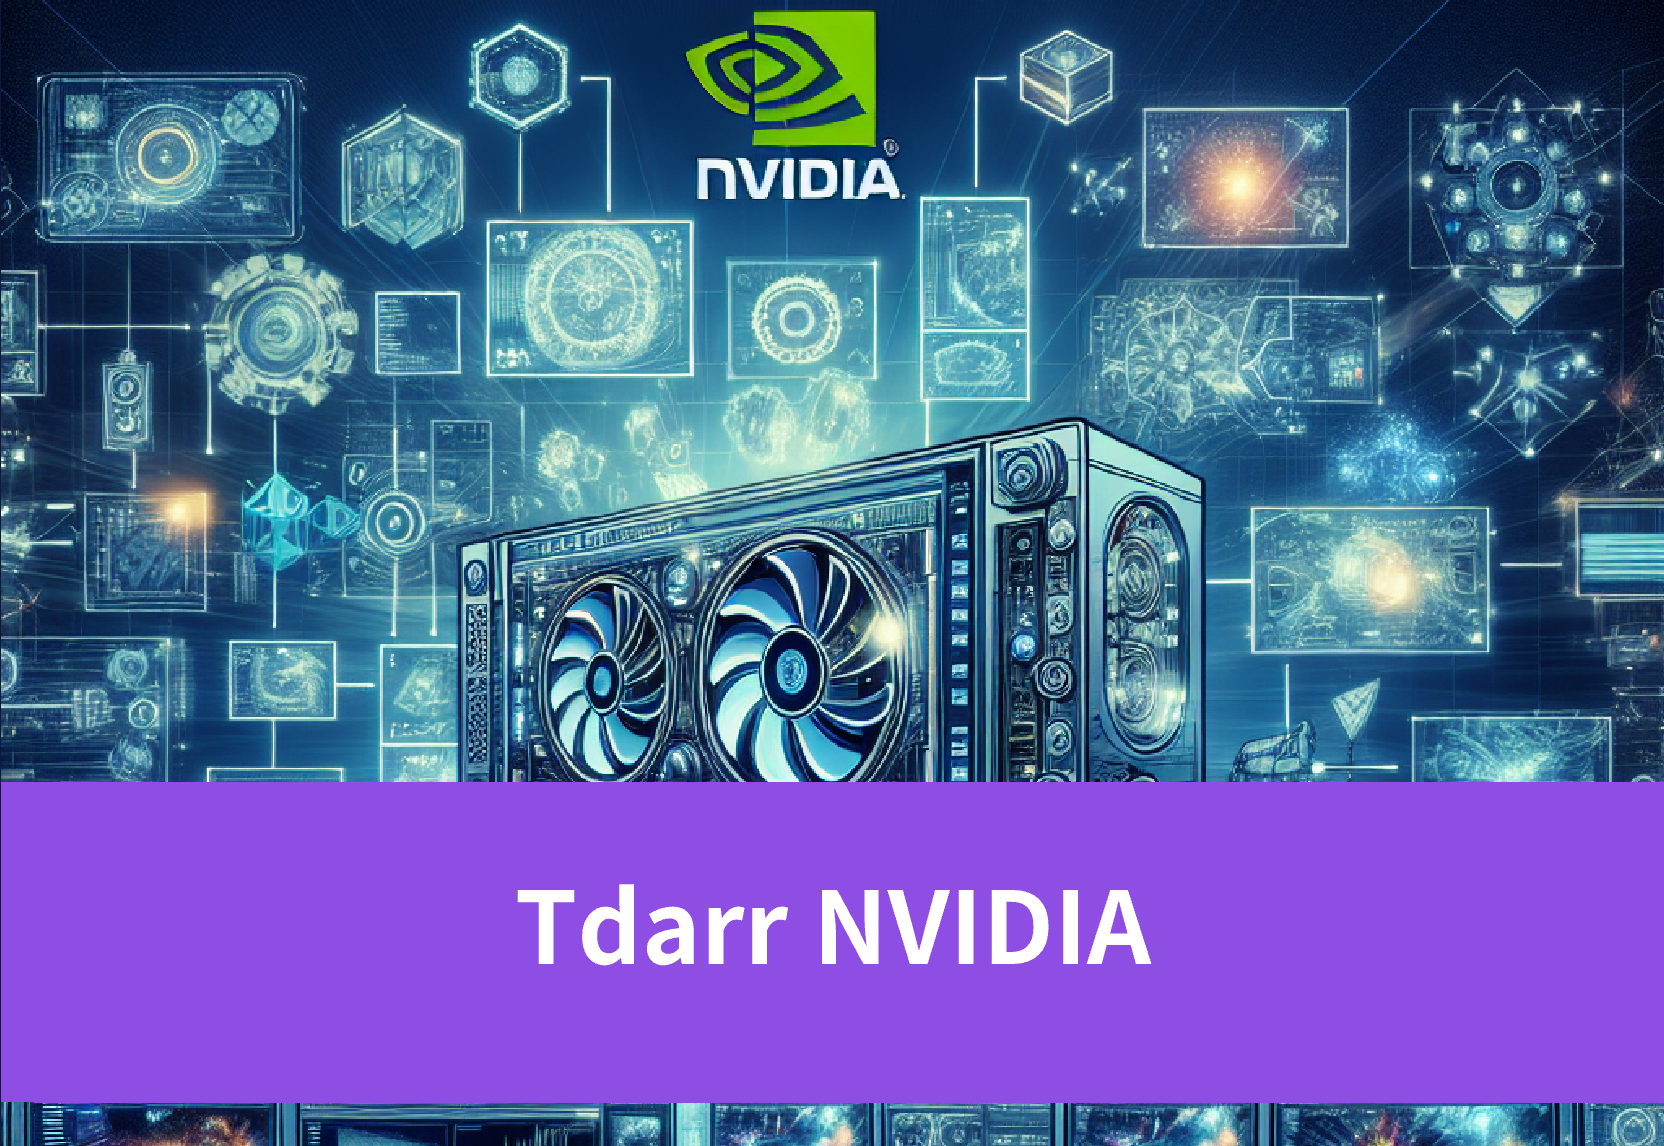 Optimizing Media Workflows with Tdarr and NVIDIA